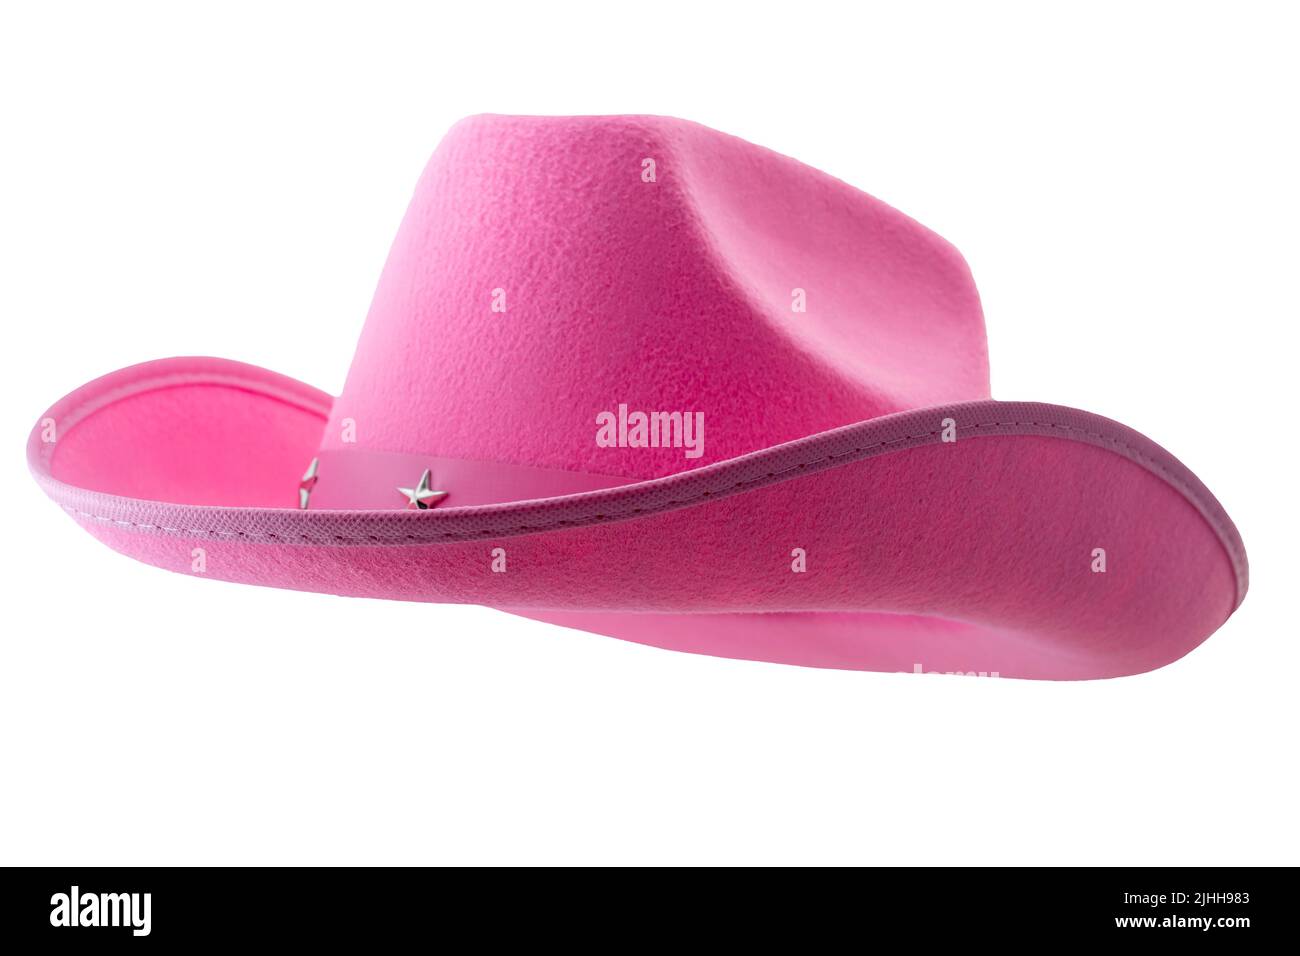 Pink cowboy hat isolated on white background with clipping path cutout concept for feminine western attire, gentle femininity, American culture  and f Stock Photo